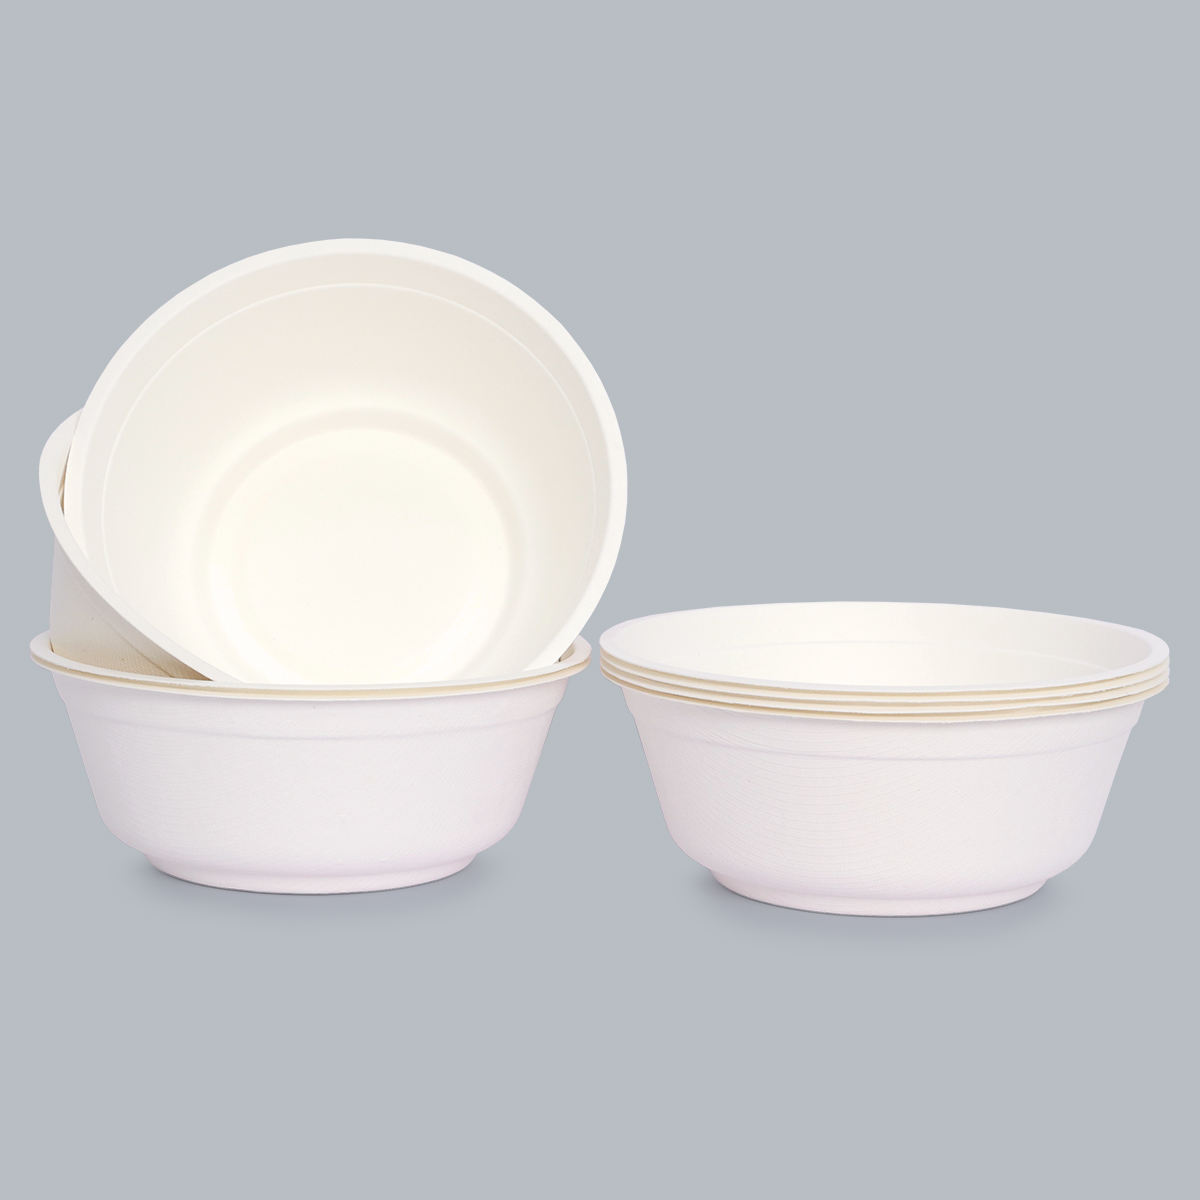 Compostable bowls Eco-Friendly Food Containers Tableware 910ml Round Bowl